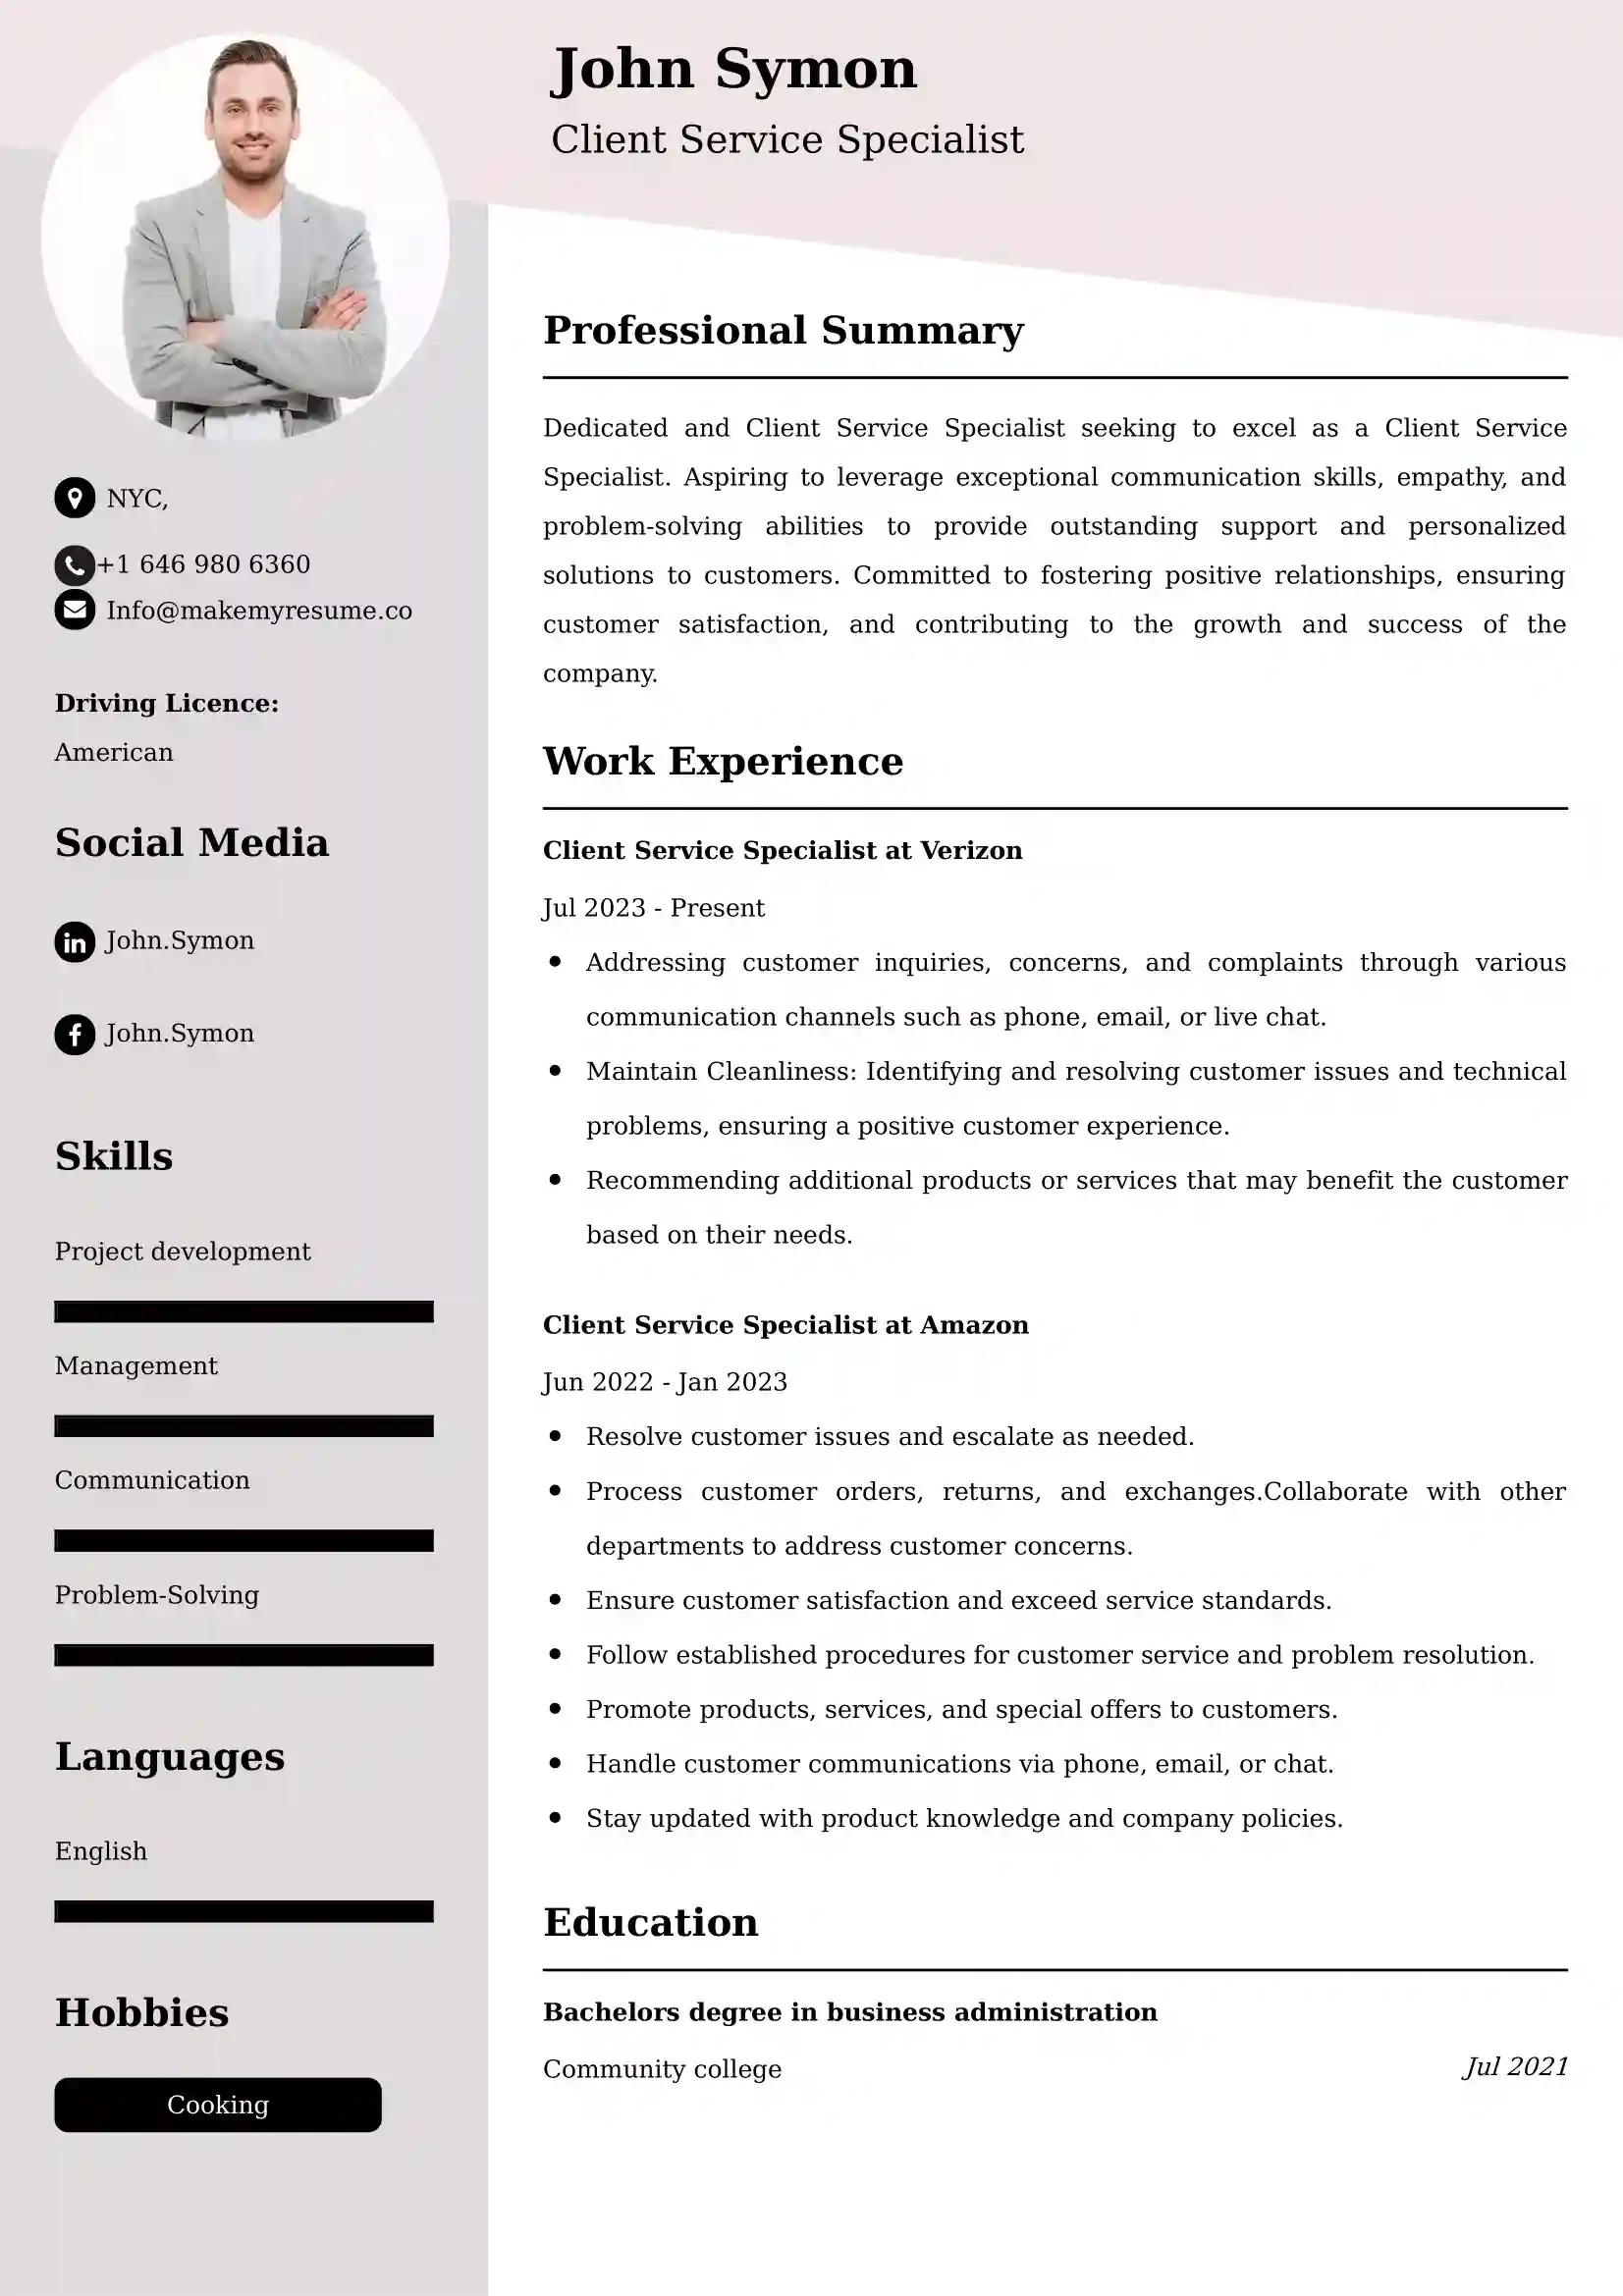 Client Service Specialist CV Examples Malaysia